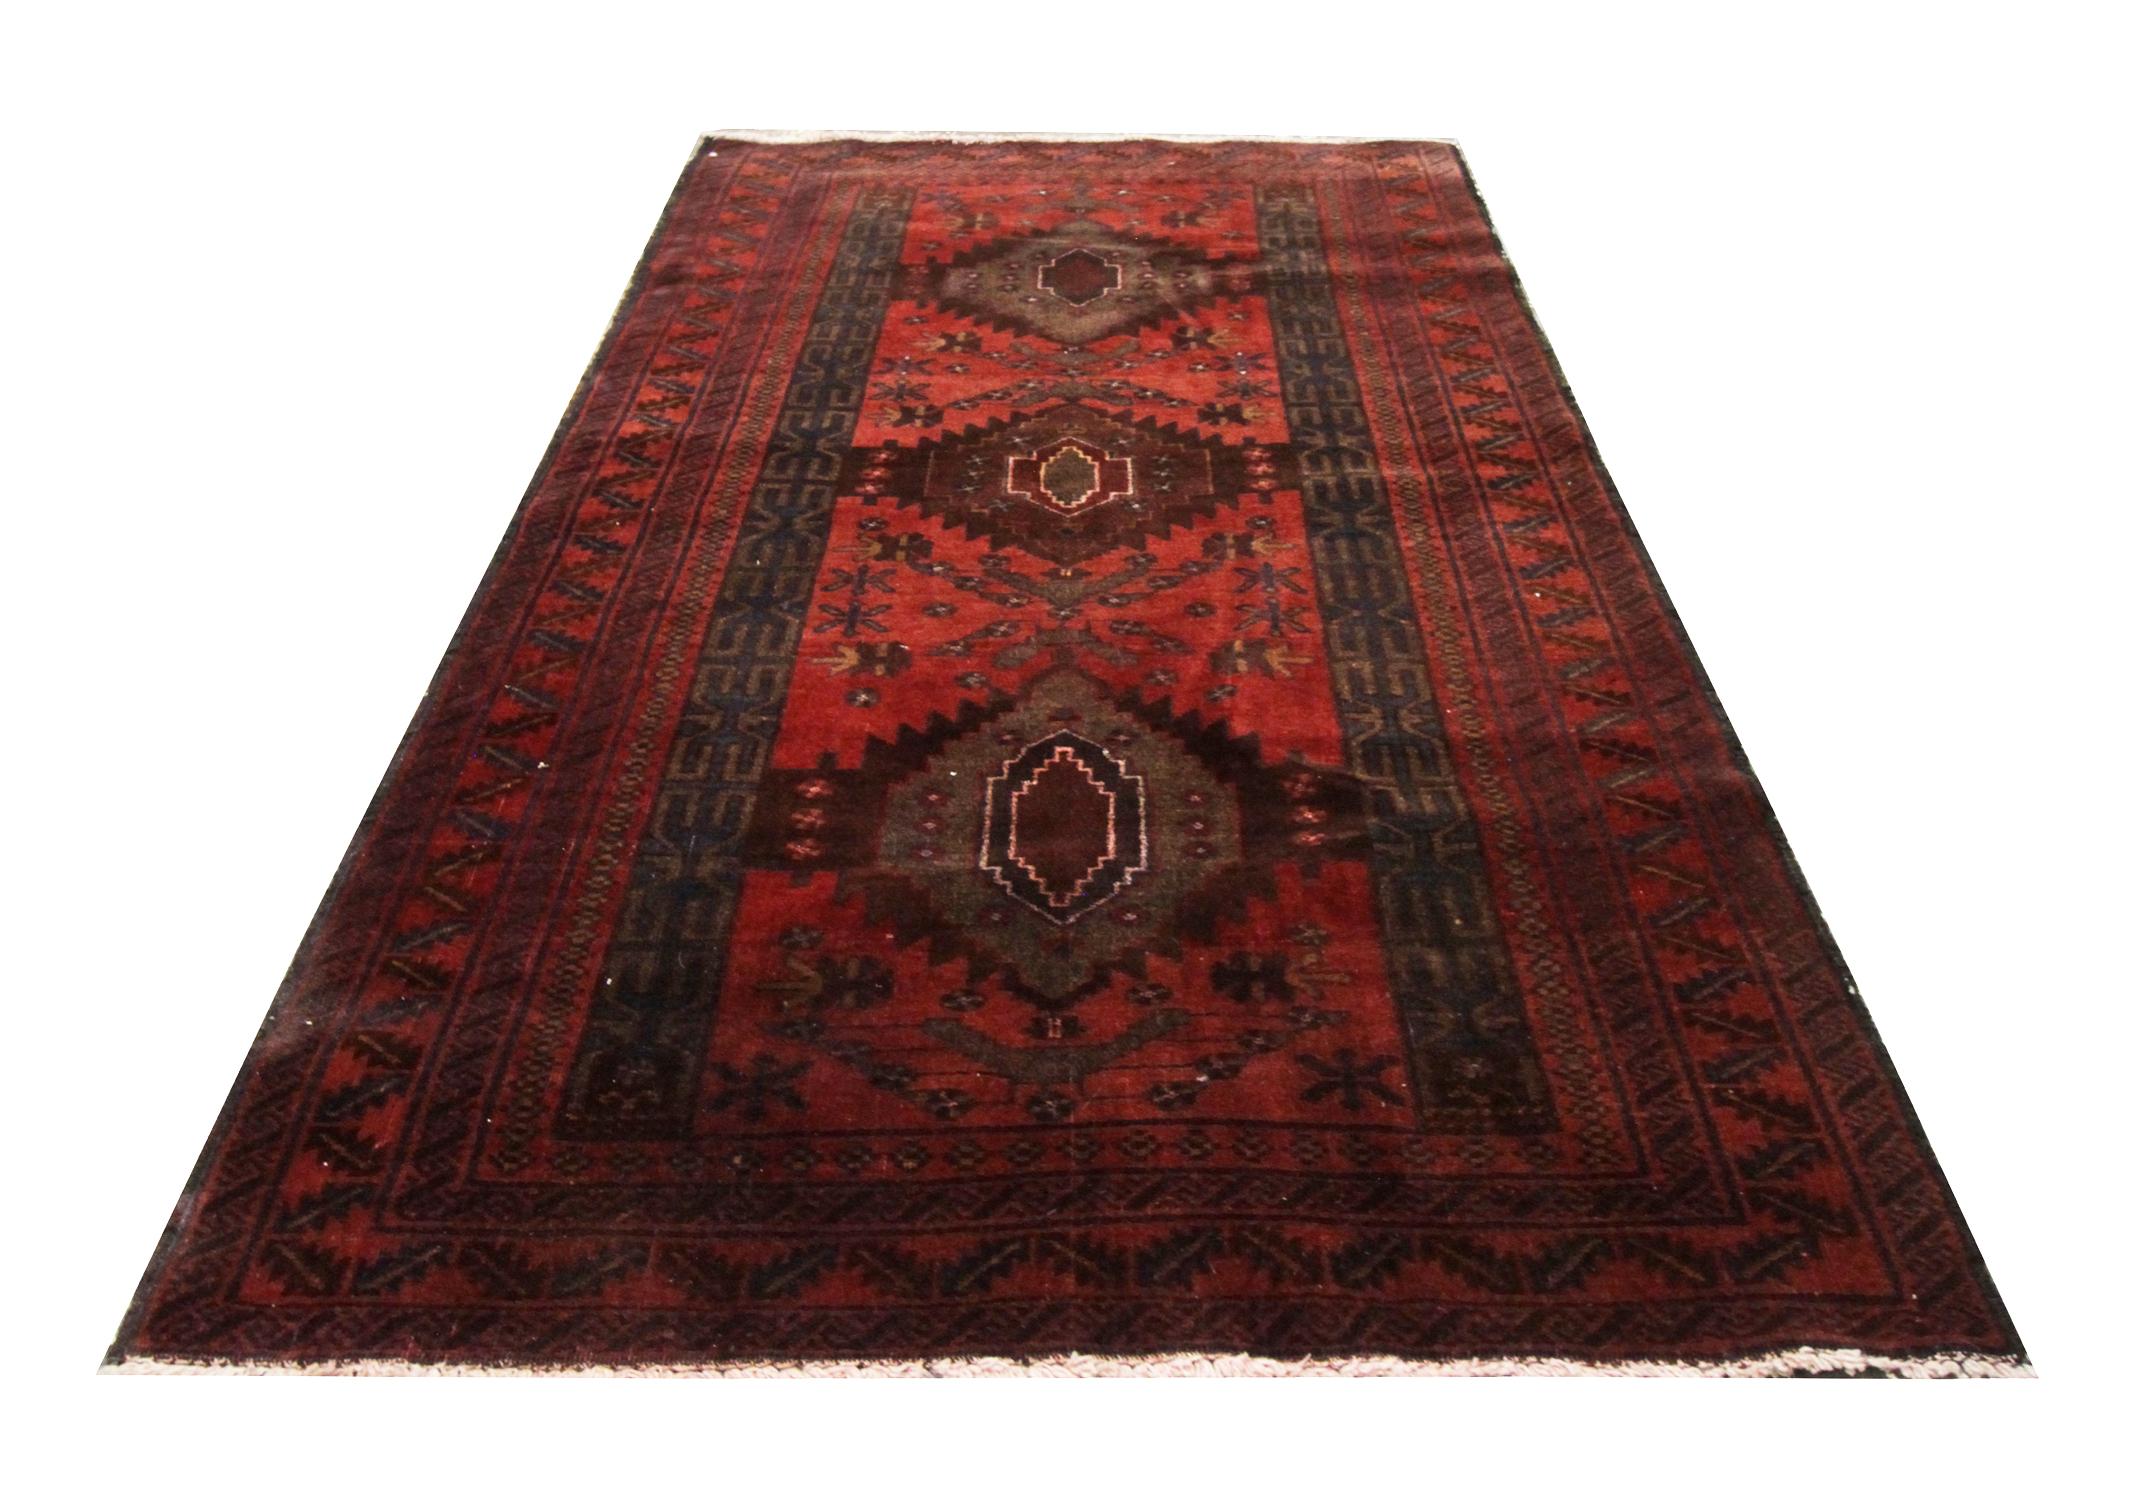 This elegantly woven wool carpet was constructed by hand in the 1960s. The central design has been woven with three large diamond medallions woven with a decorative surrounding design and border. Deep red, brown, black and blue make up the main